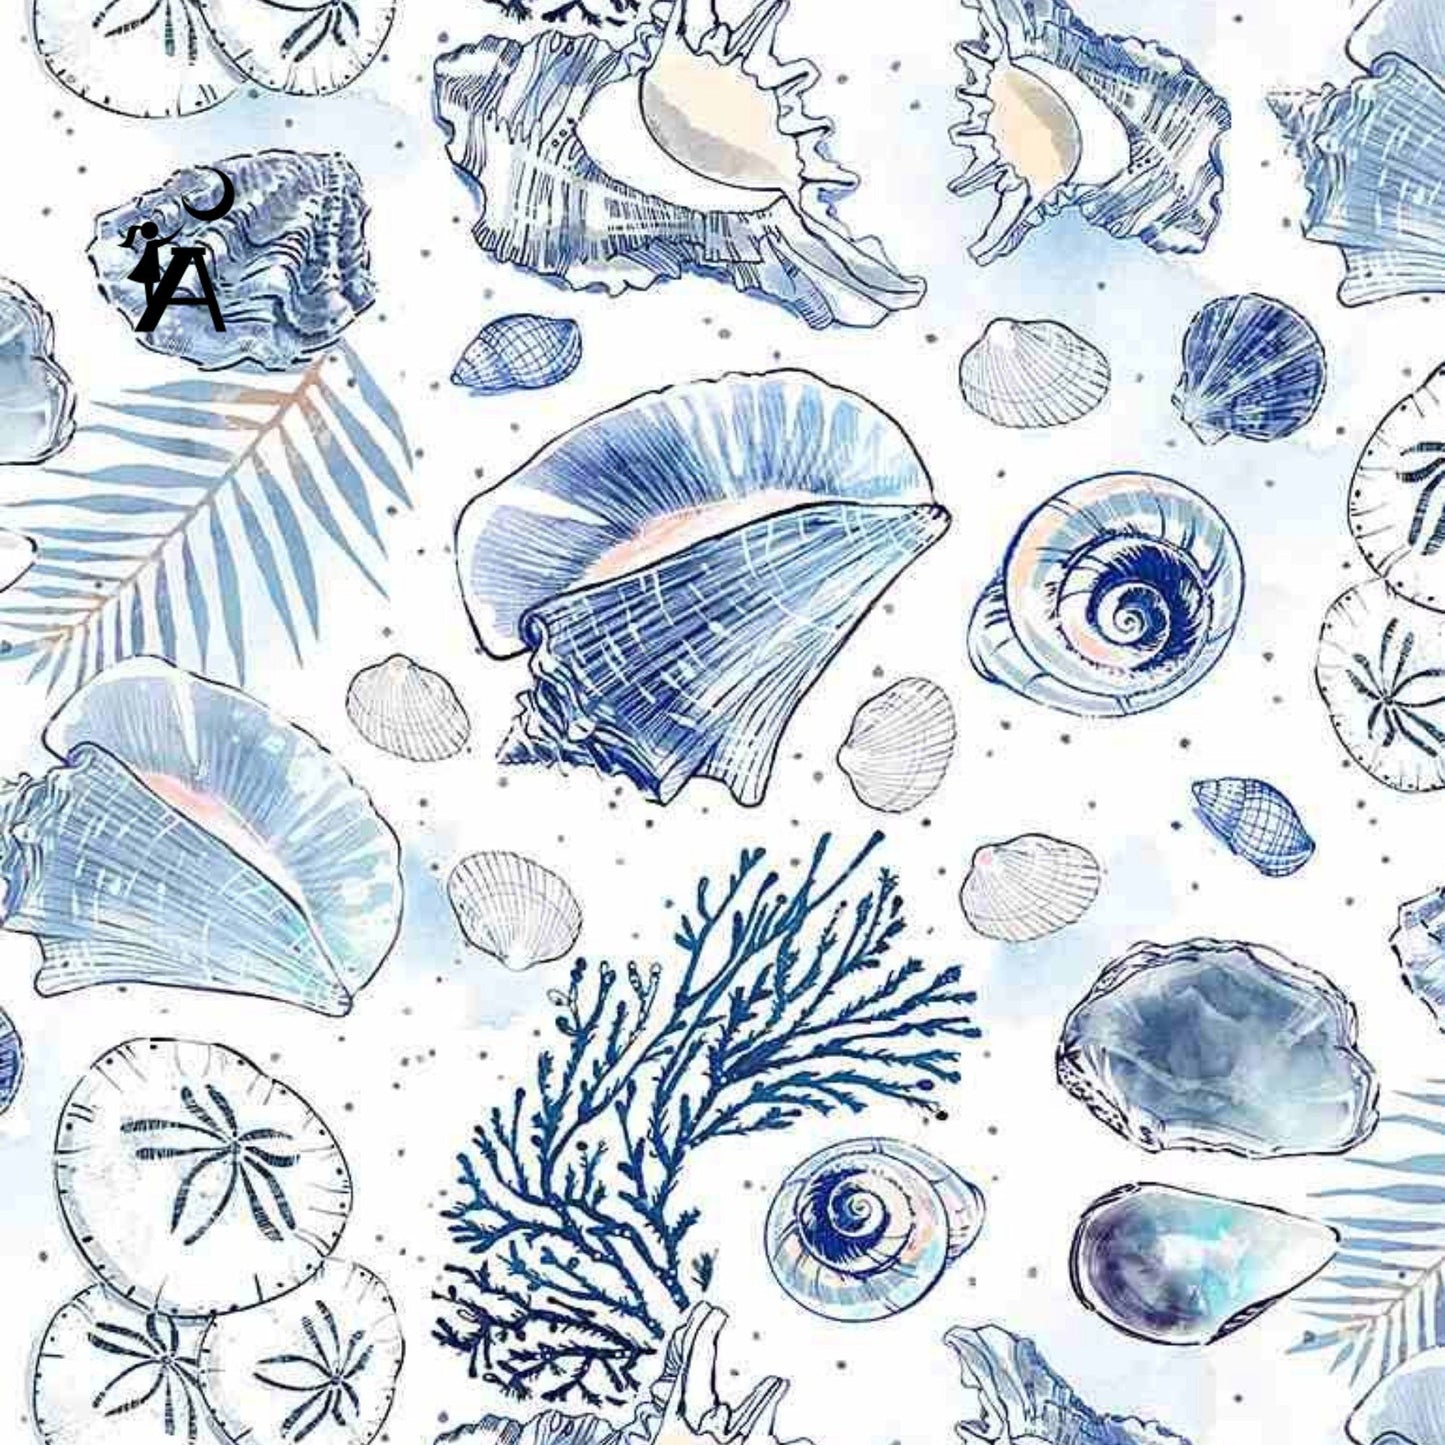 Timeless Treasures Fabric Thomas Little Ocean Blue Beach Fabric & Nautical Fabric Bundle with Beach Dreams Panel 8 FQ pieces and 1 panel